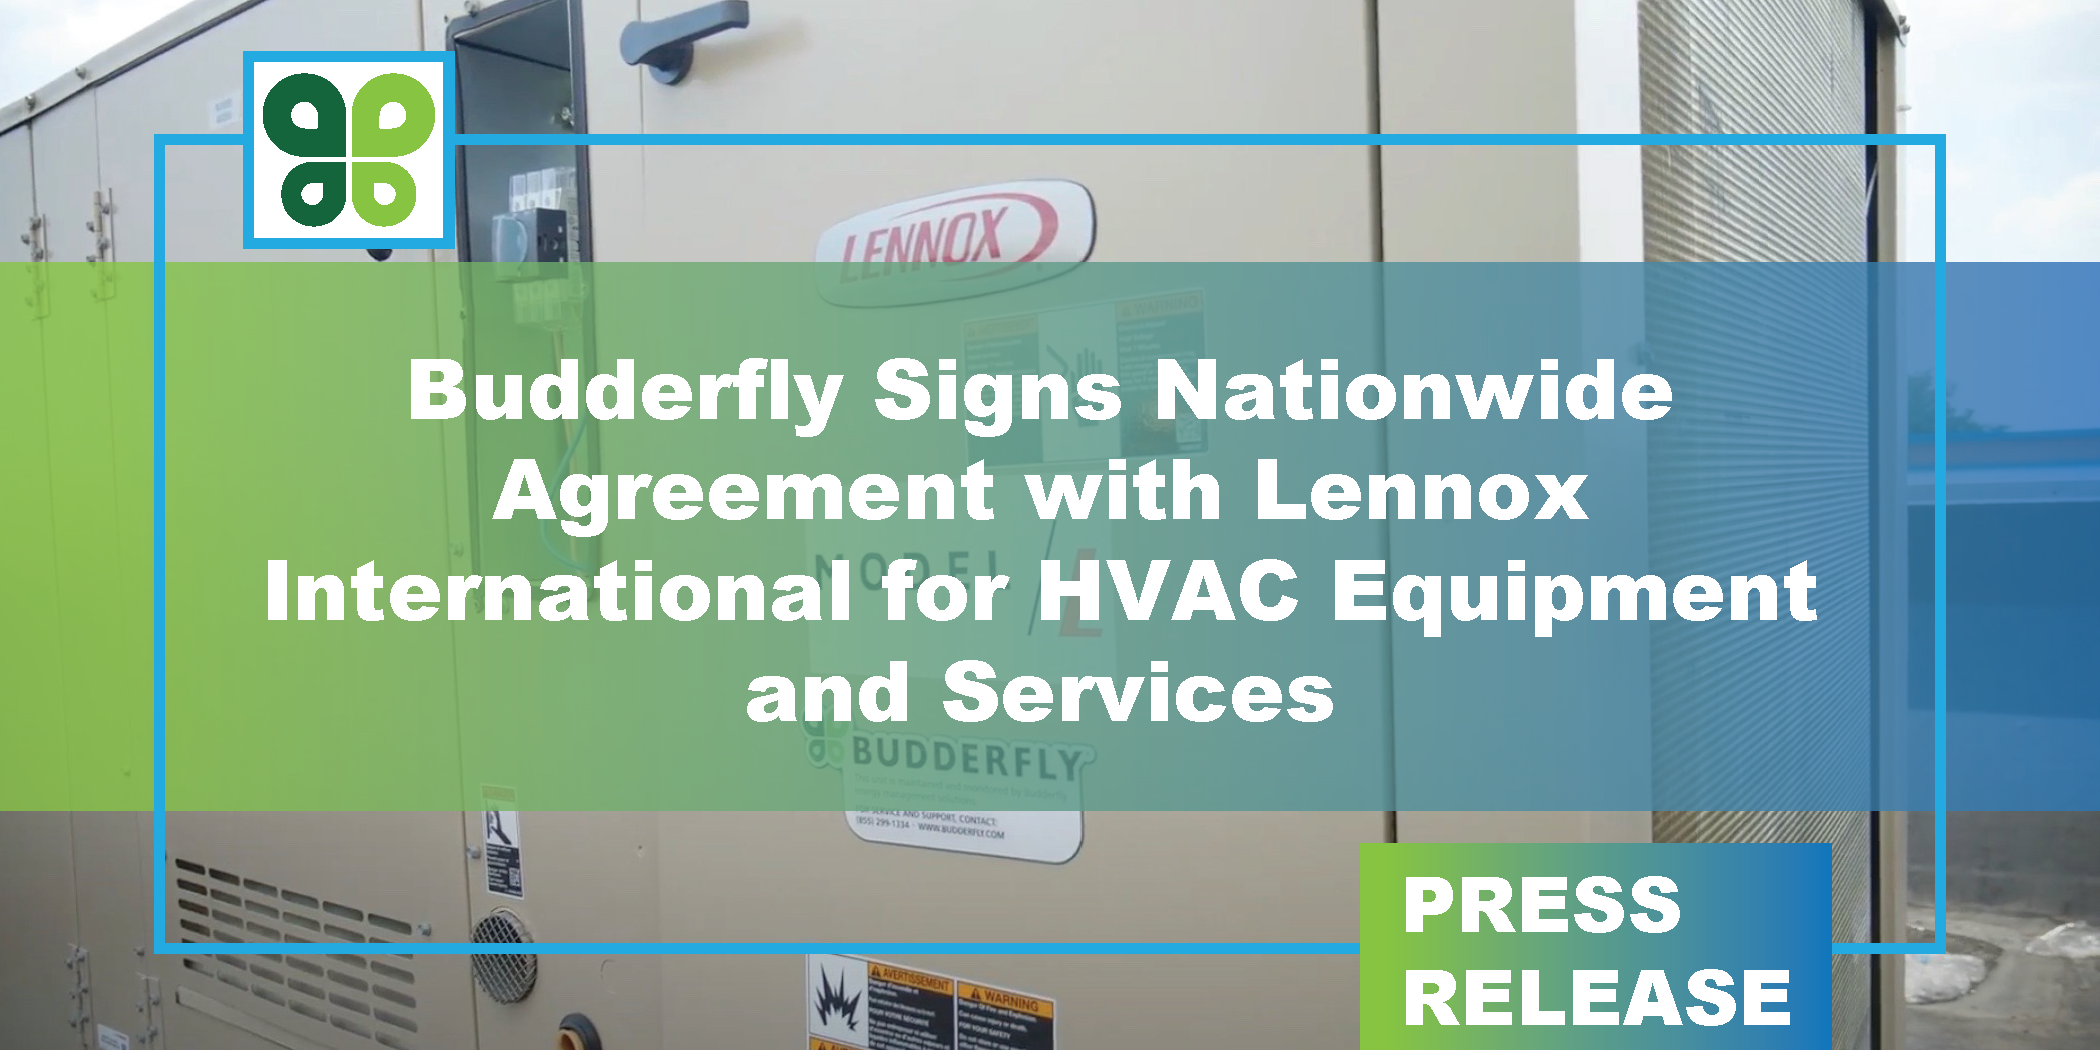 Budderfly Signs Nationwide Agreement with Lennox International for HVAC Equipment and Services